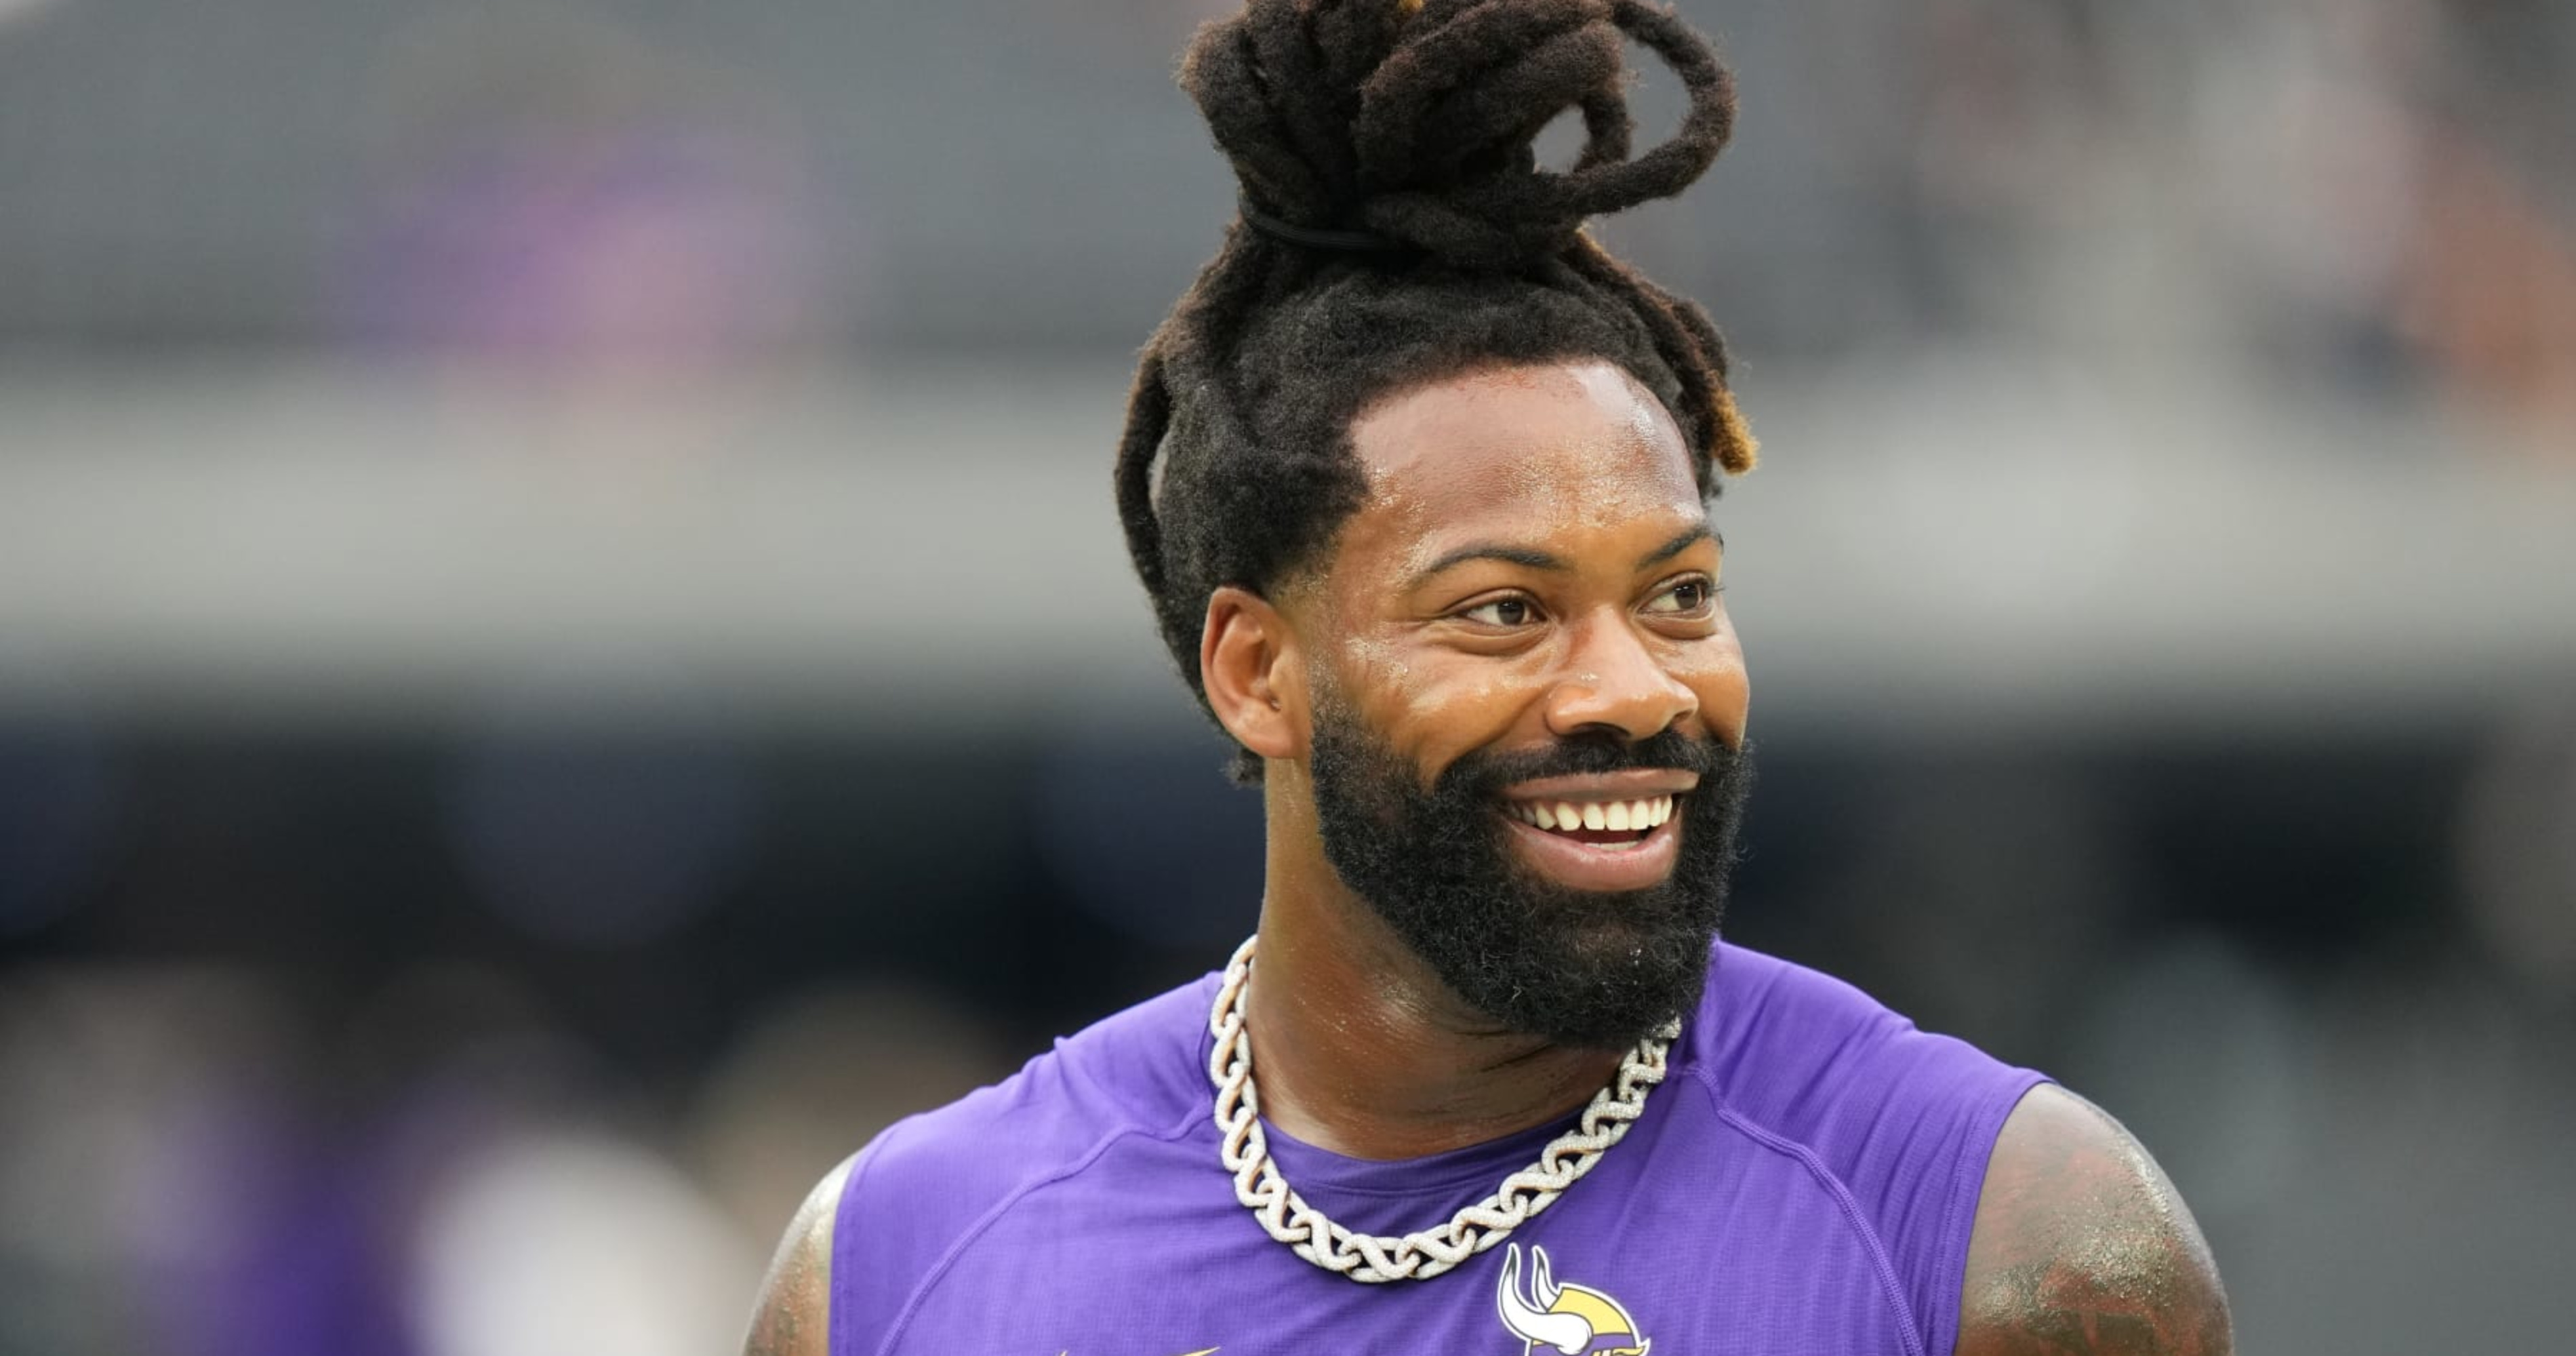 Za'Darius Smith Blasts Packers, Joined Vikings Because 'I Was Treated Bad' by GB